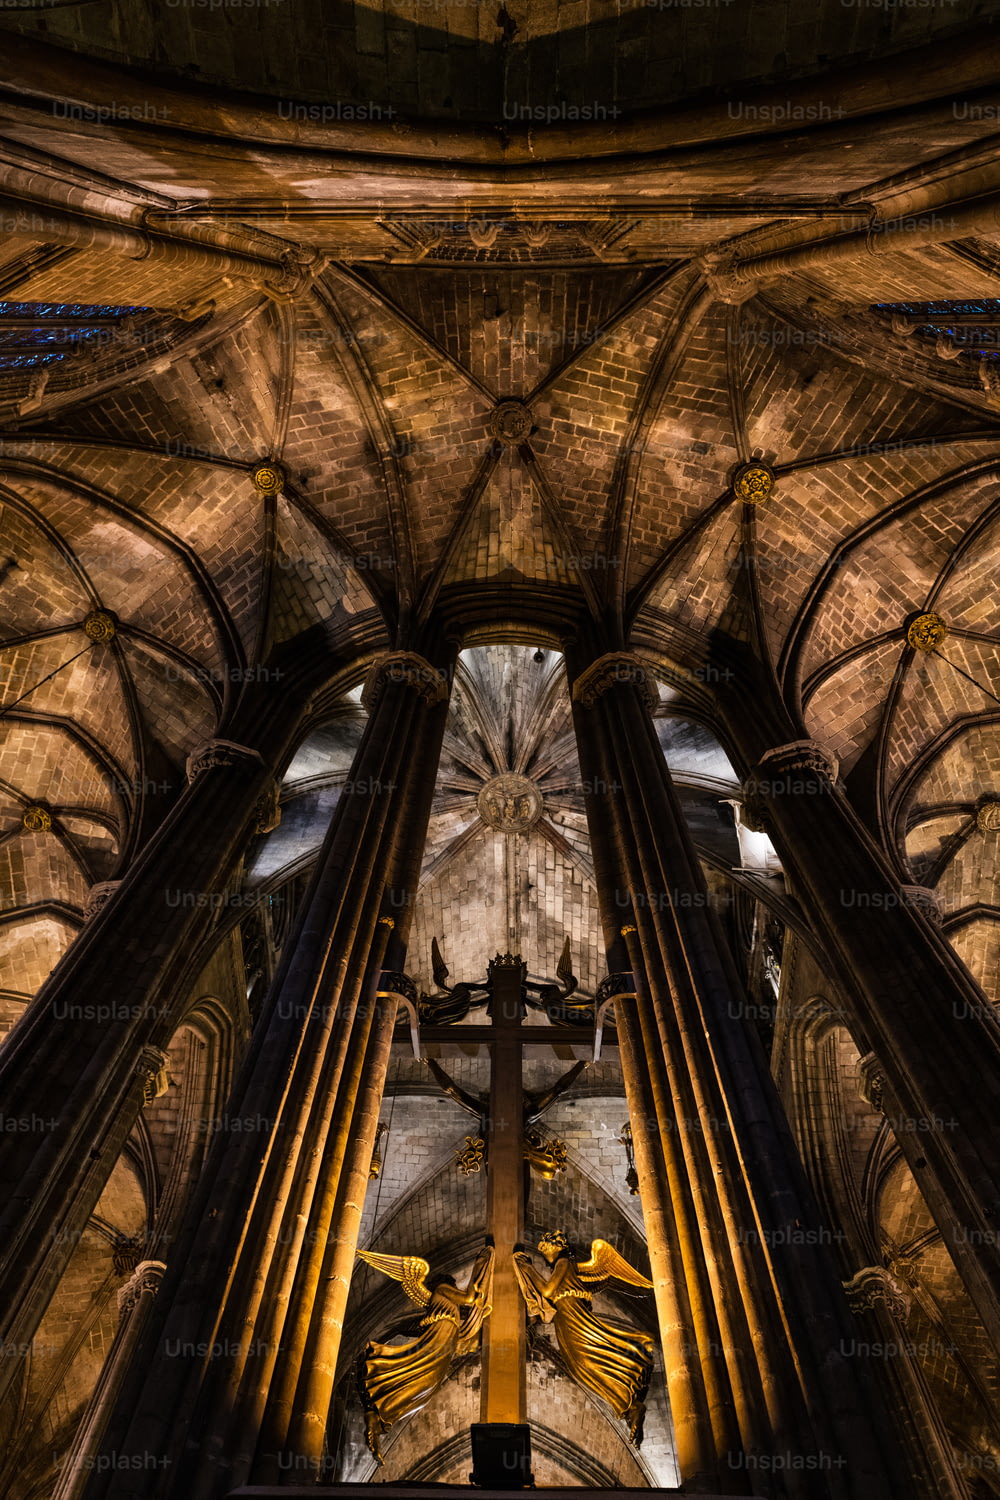 Inside view of Barcelona's gothic Cathedral, also known as La Seu, located in the heart of Barcelona's Gothic Quarter.